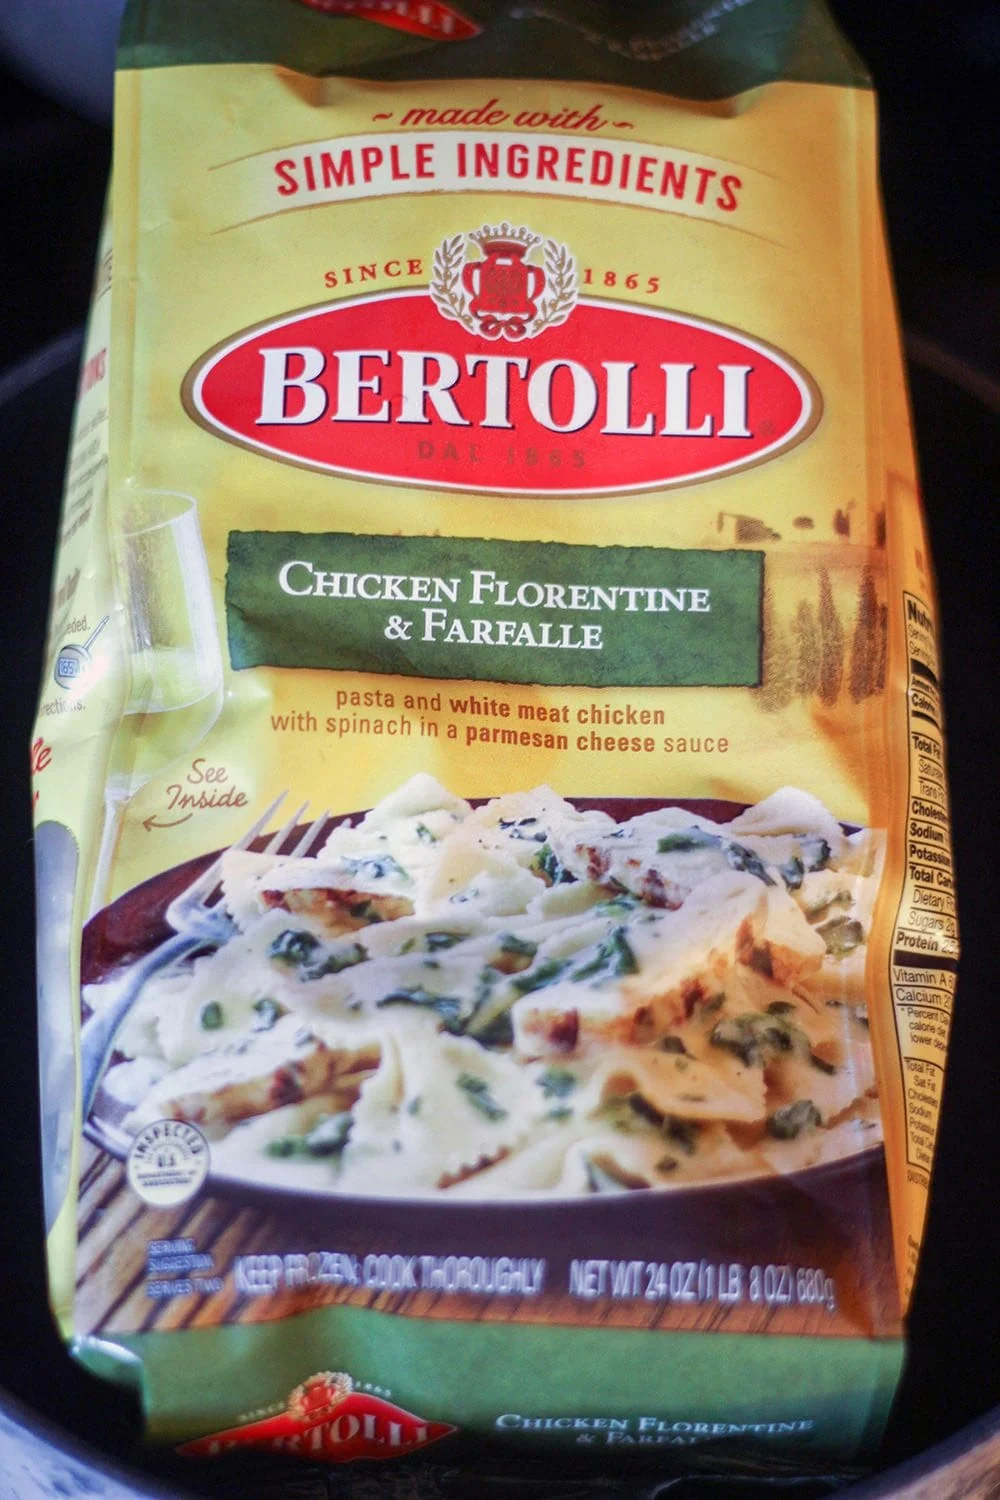 Bertolli new transparent bag and made with simple ingredients.